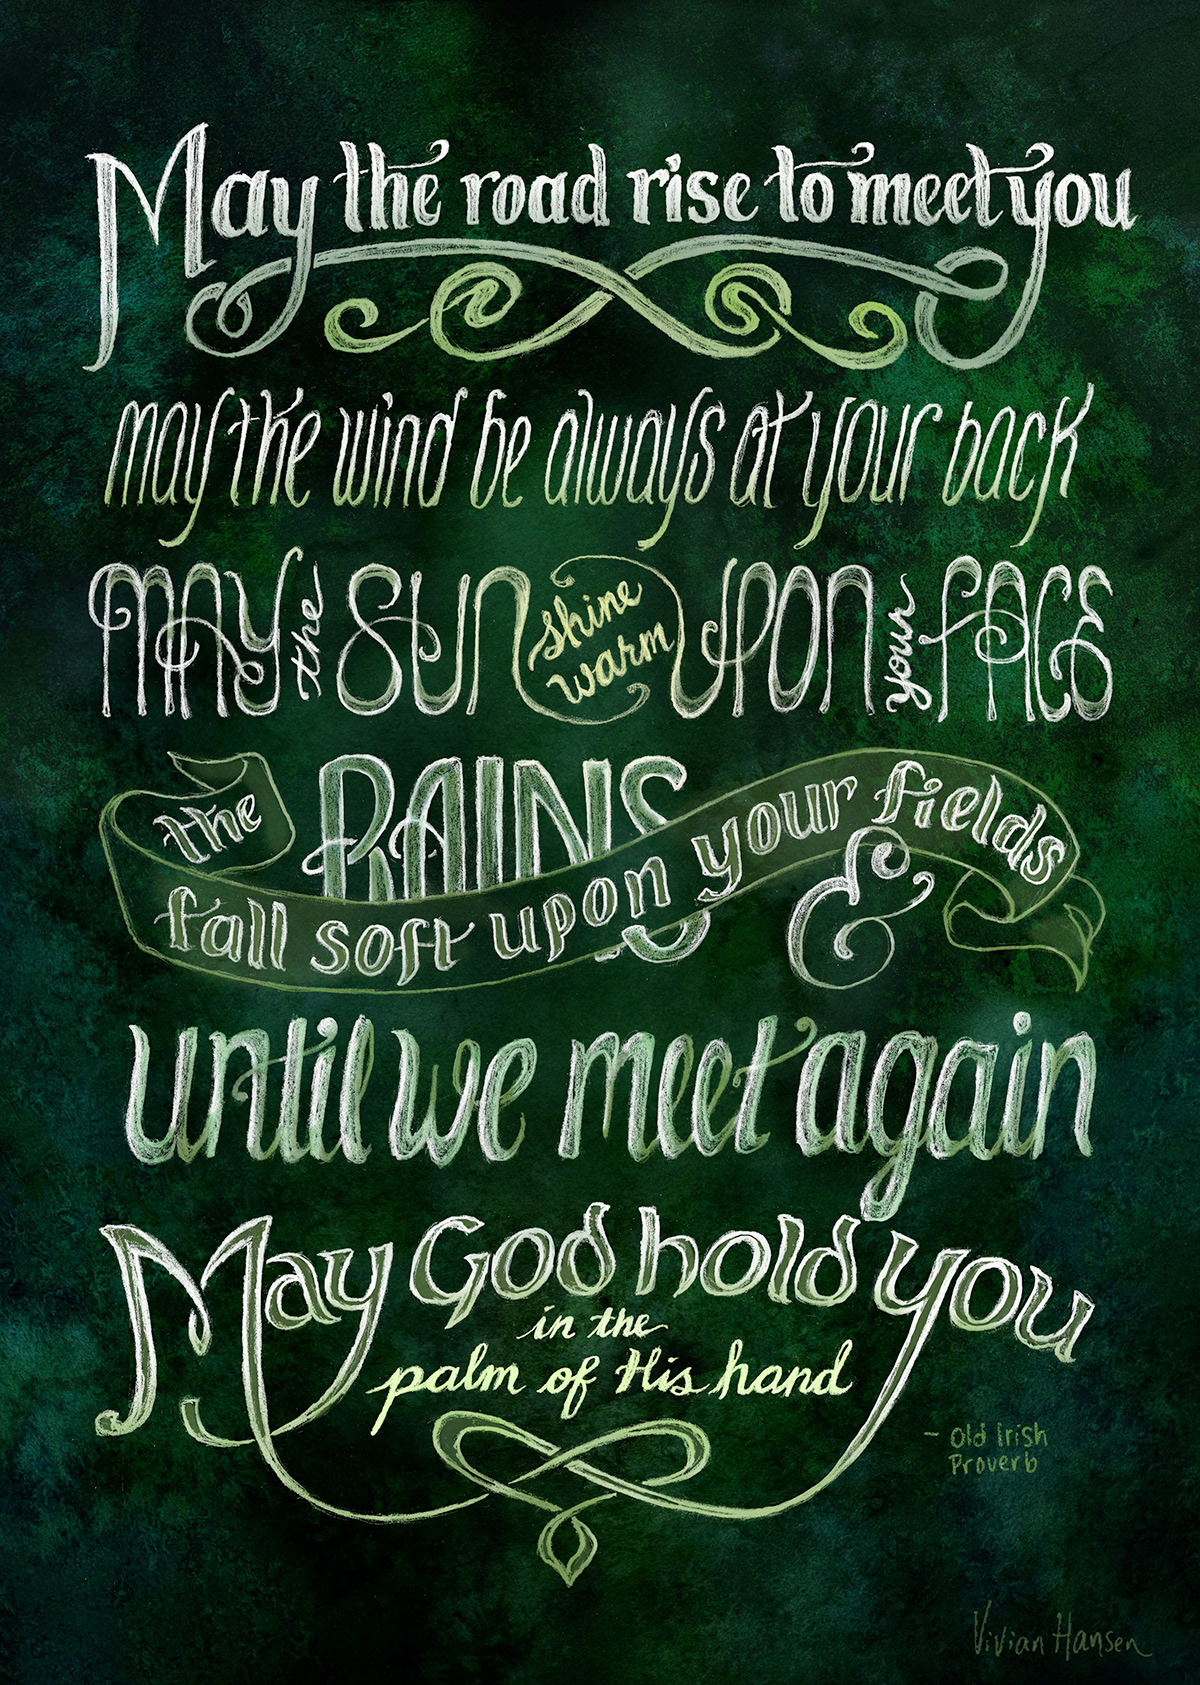 hand type Hand Typography Poetry  Prose irish proverb traditional st patrick's day card greeting Ireland paper